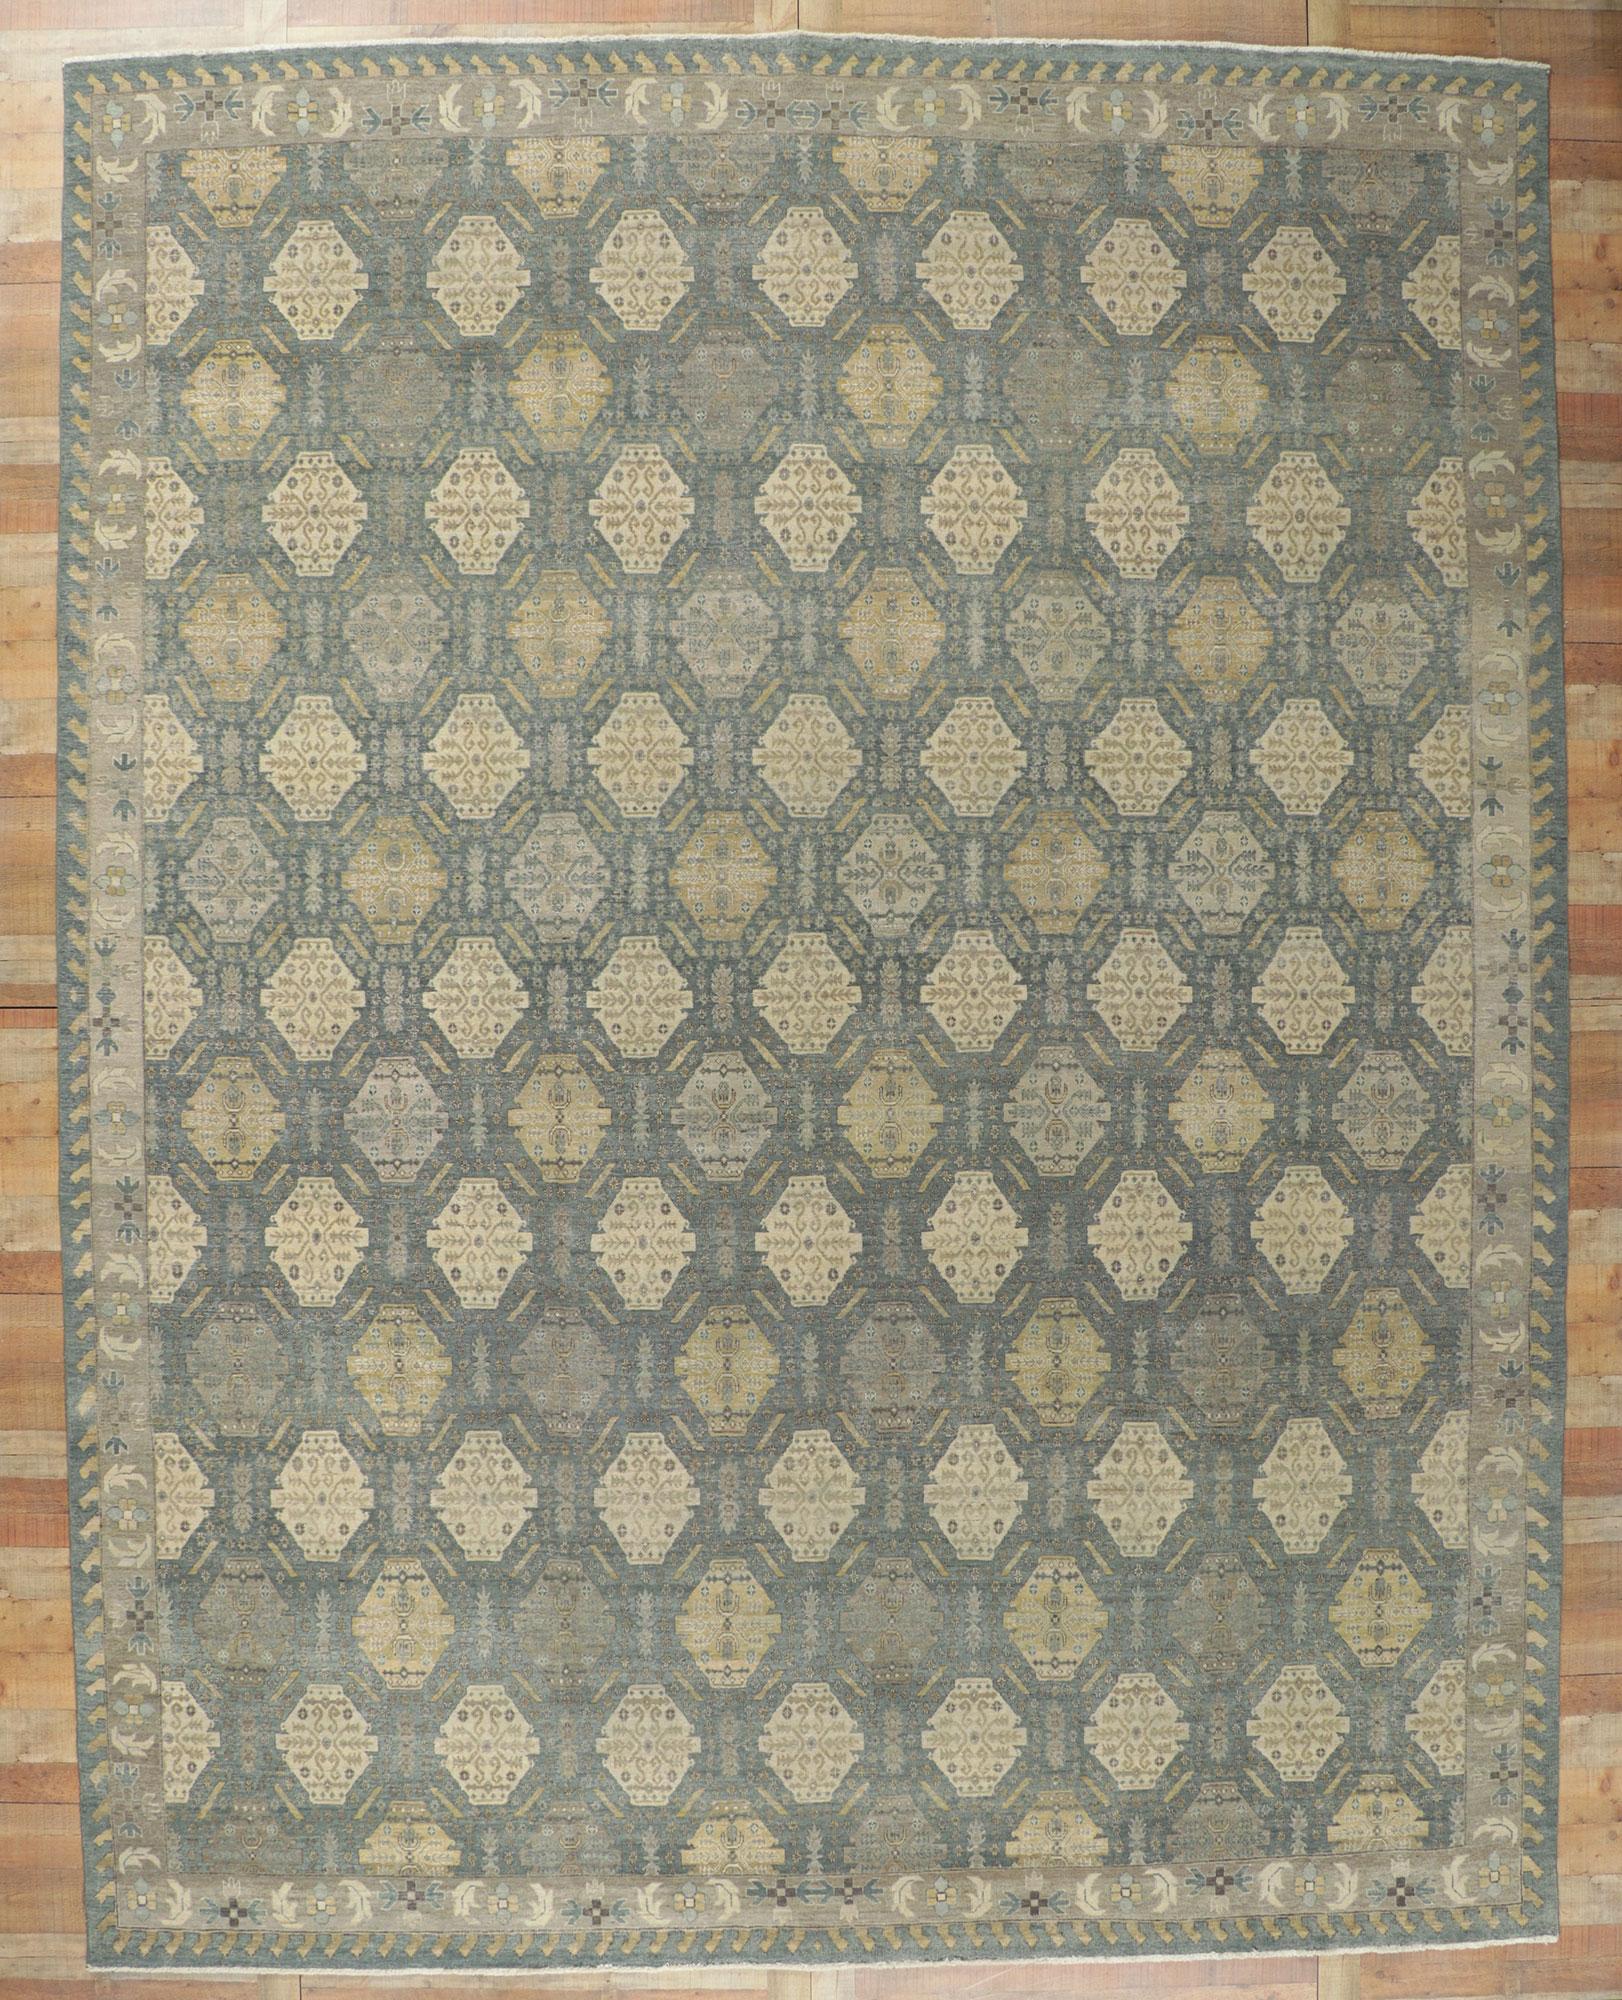 Vintage-Inspired Muted Oushak Rug, Modern Style Meets Rustic Sensibility For Sale 1